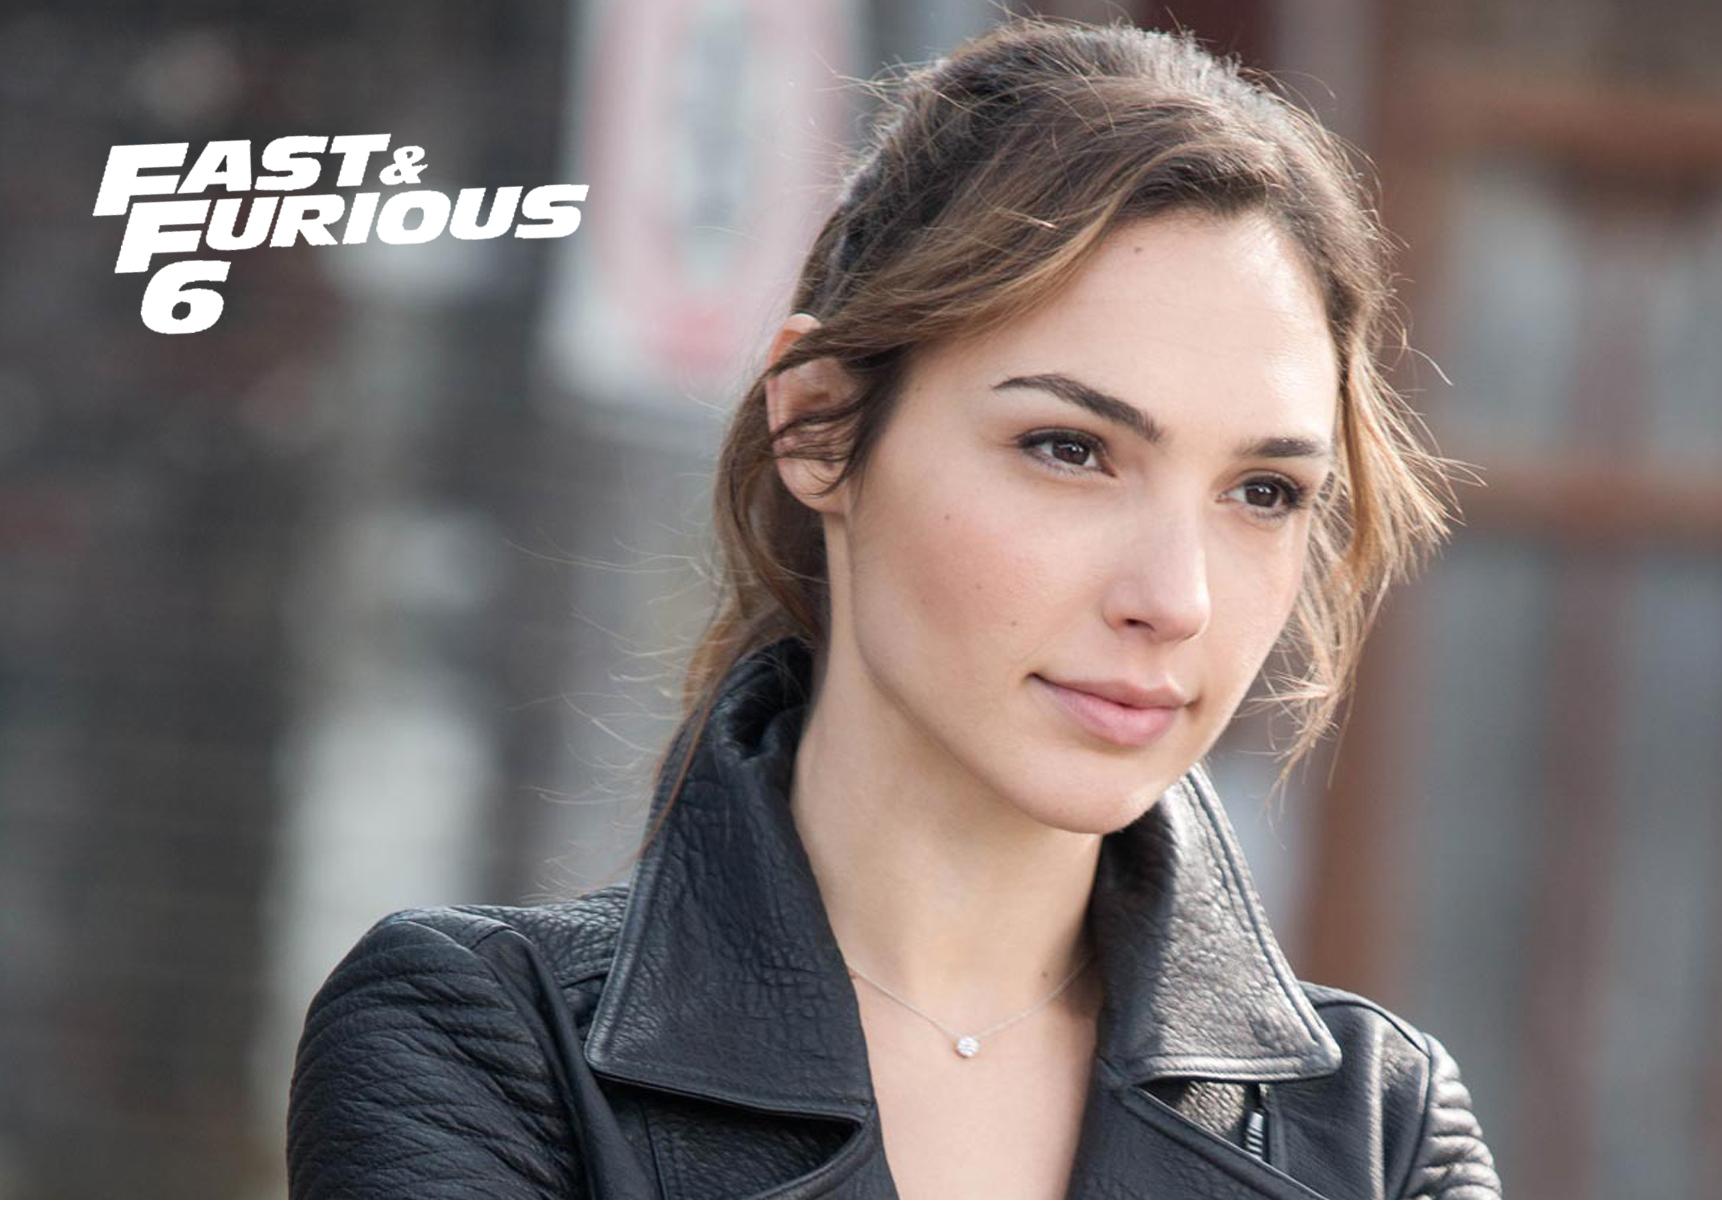 Gal Gadot Fantastic Fast And Furious Amazing Attractive Look Mobile Free Background Desktop Hd Photo